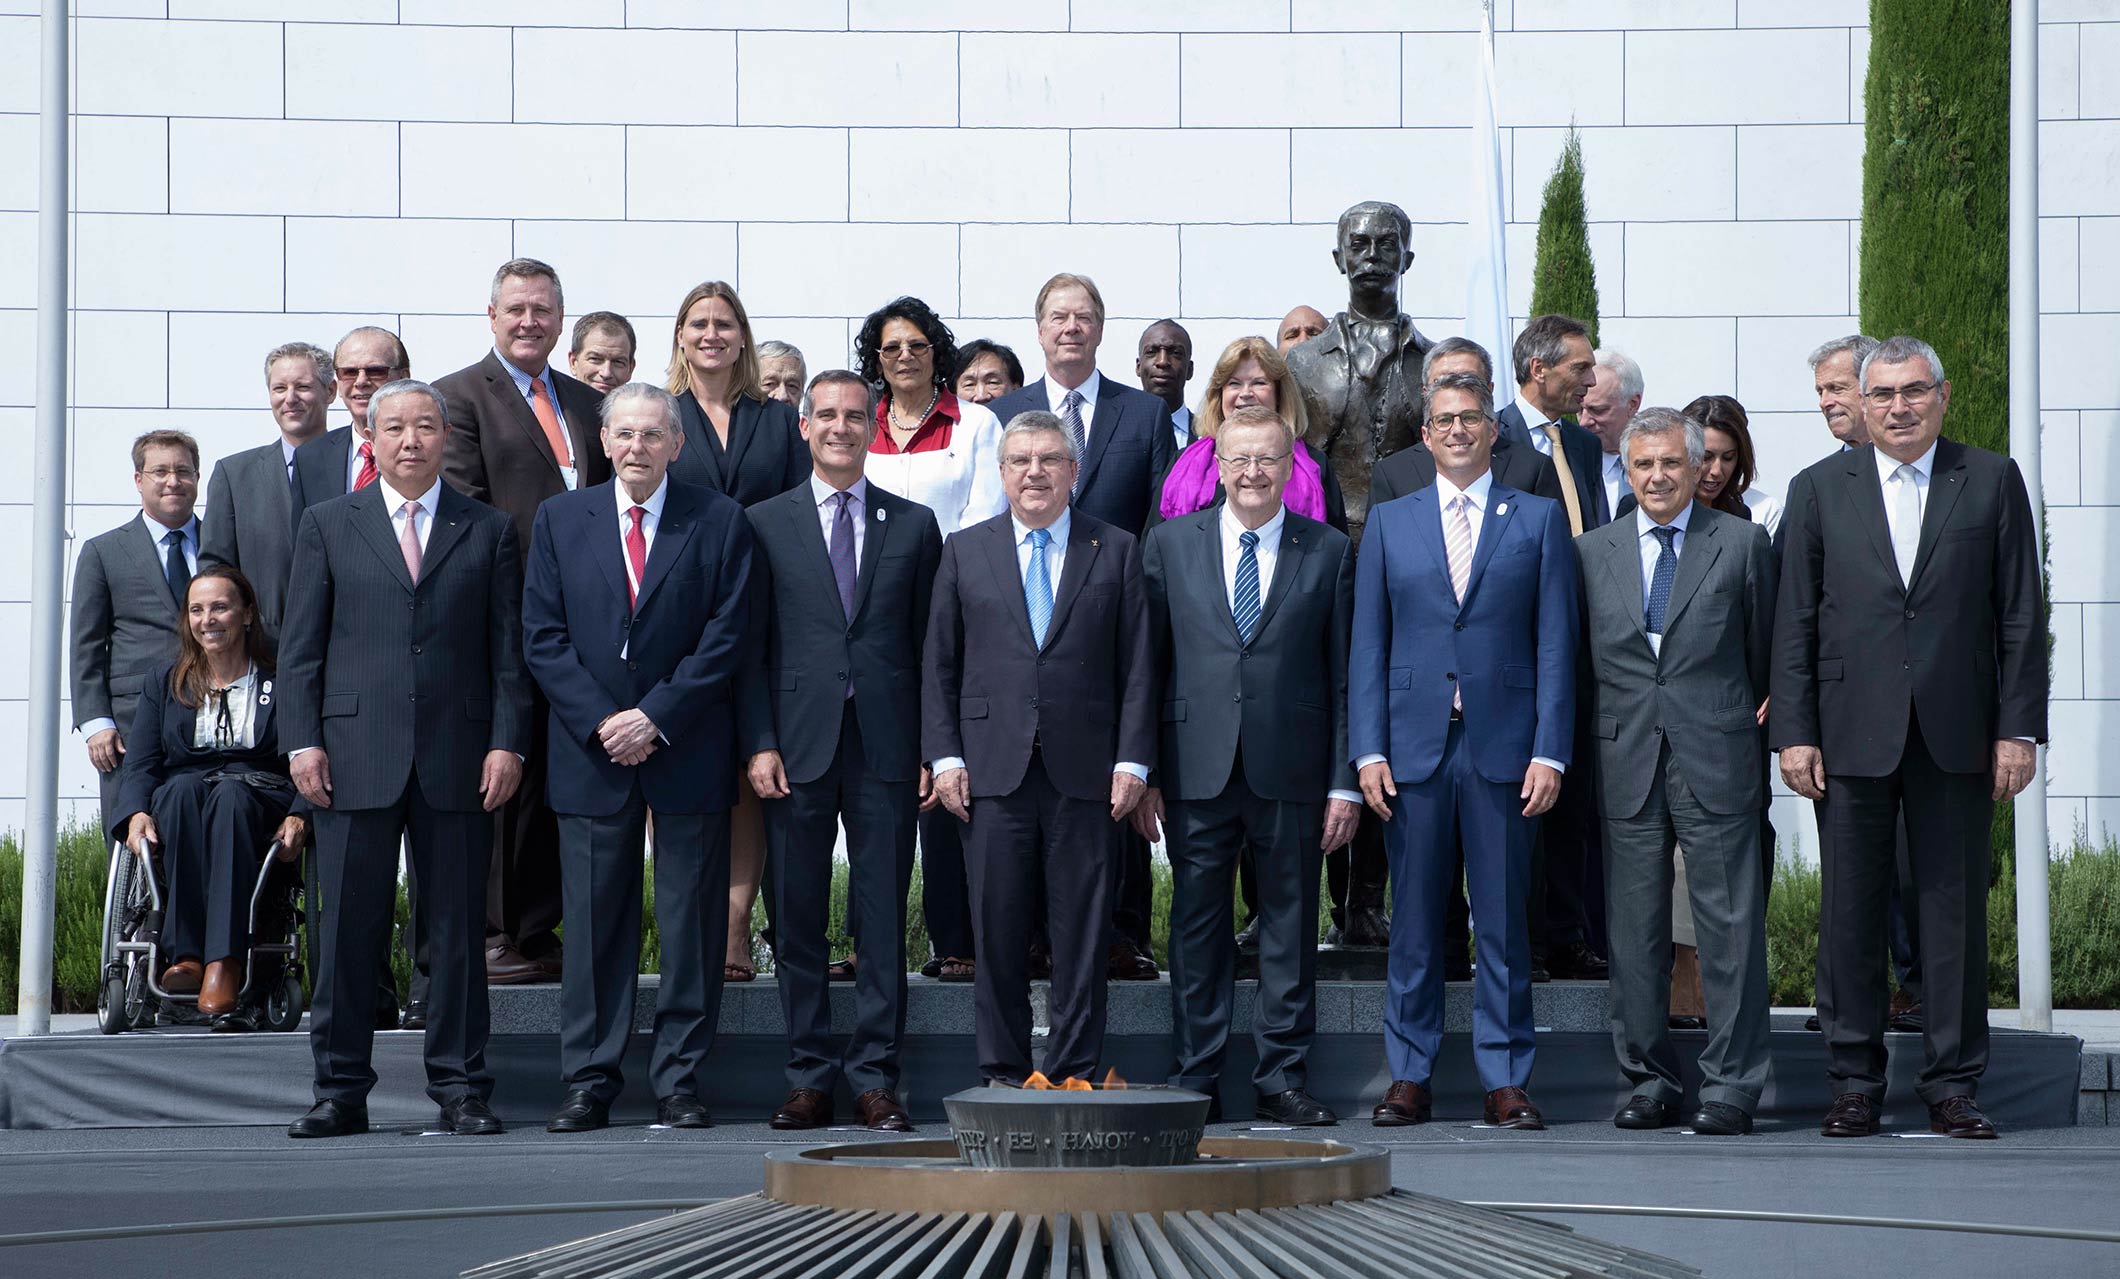 Los Angeles 2024 delegation and the IOC Executive Board